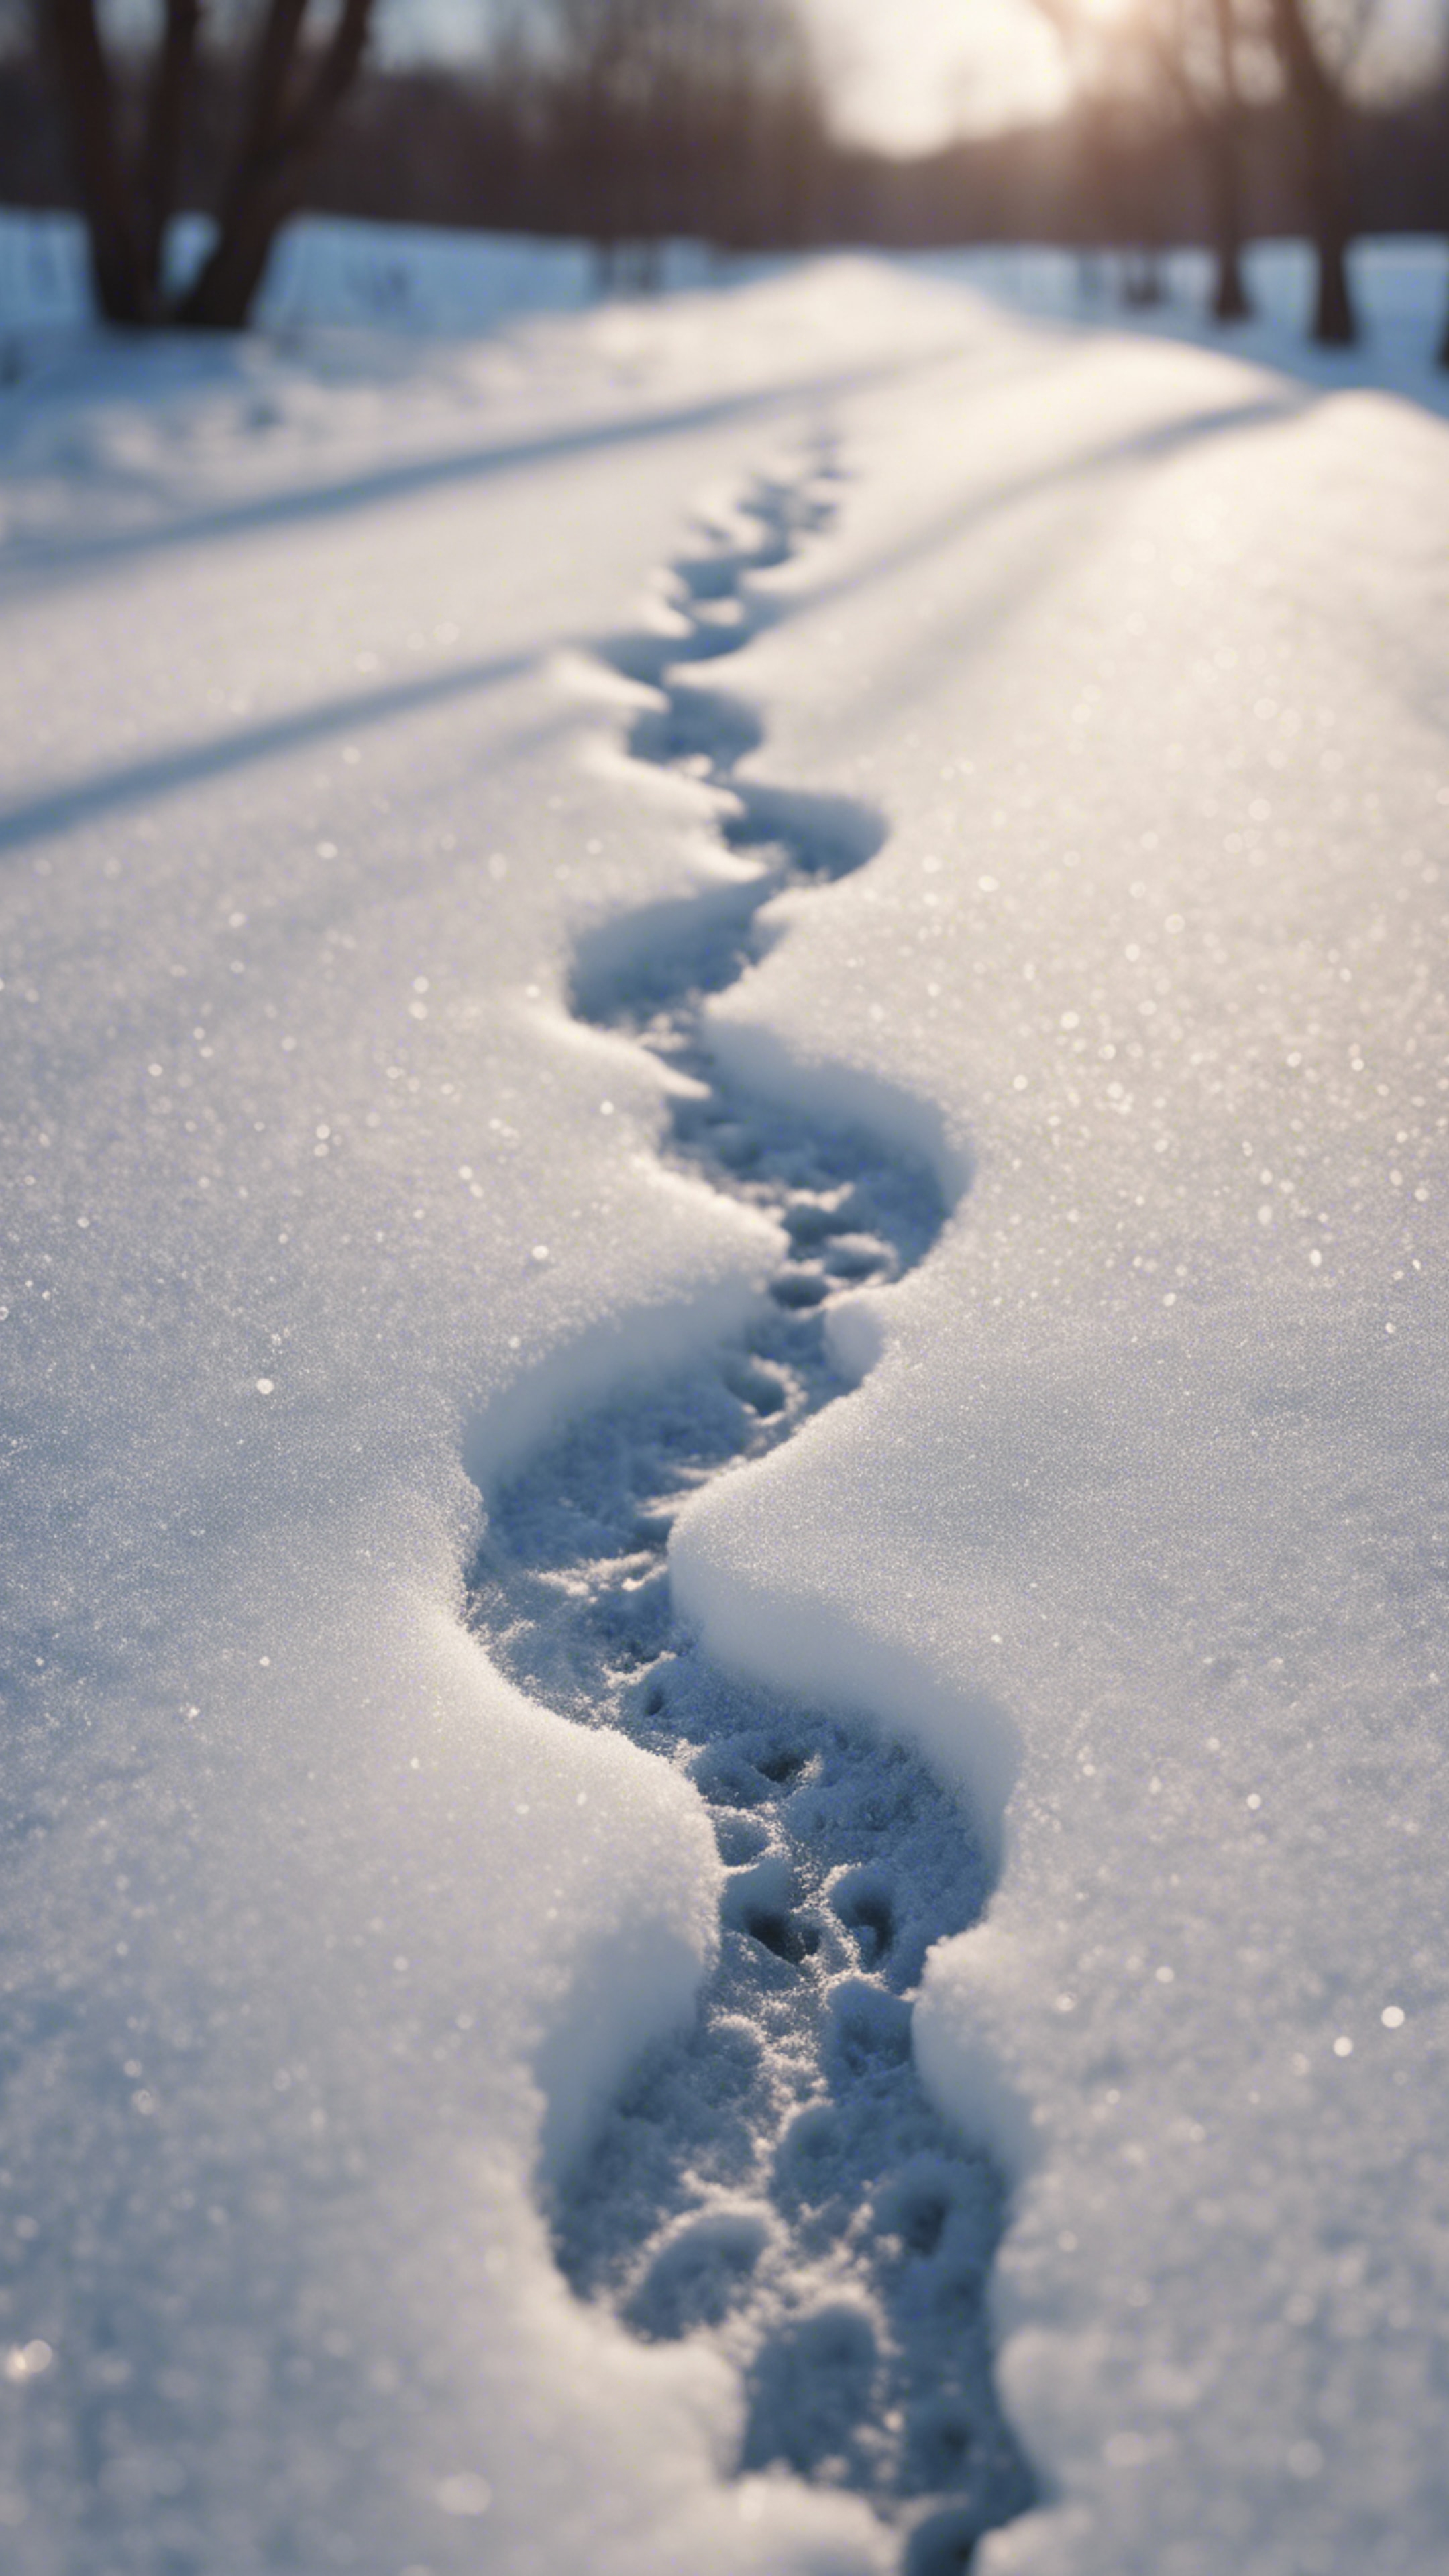 A pair of frosty, heart-shaped footprints imprinted on a snow-covered lane, symbolizing love in winter. Kertas dinding[a9223da6c59742c6a00f]